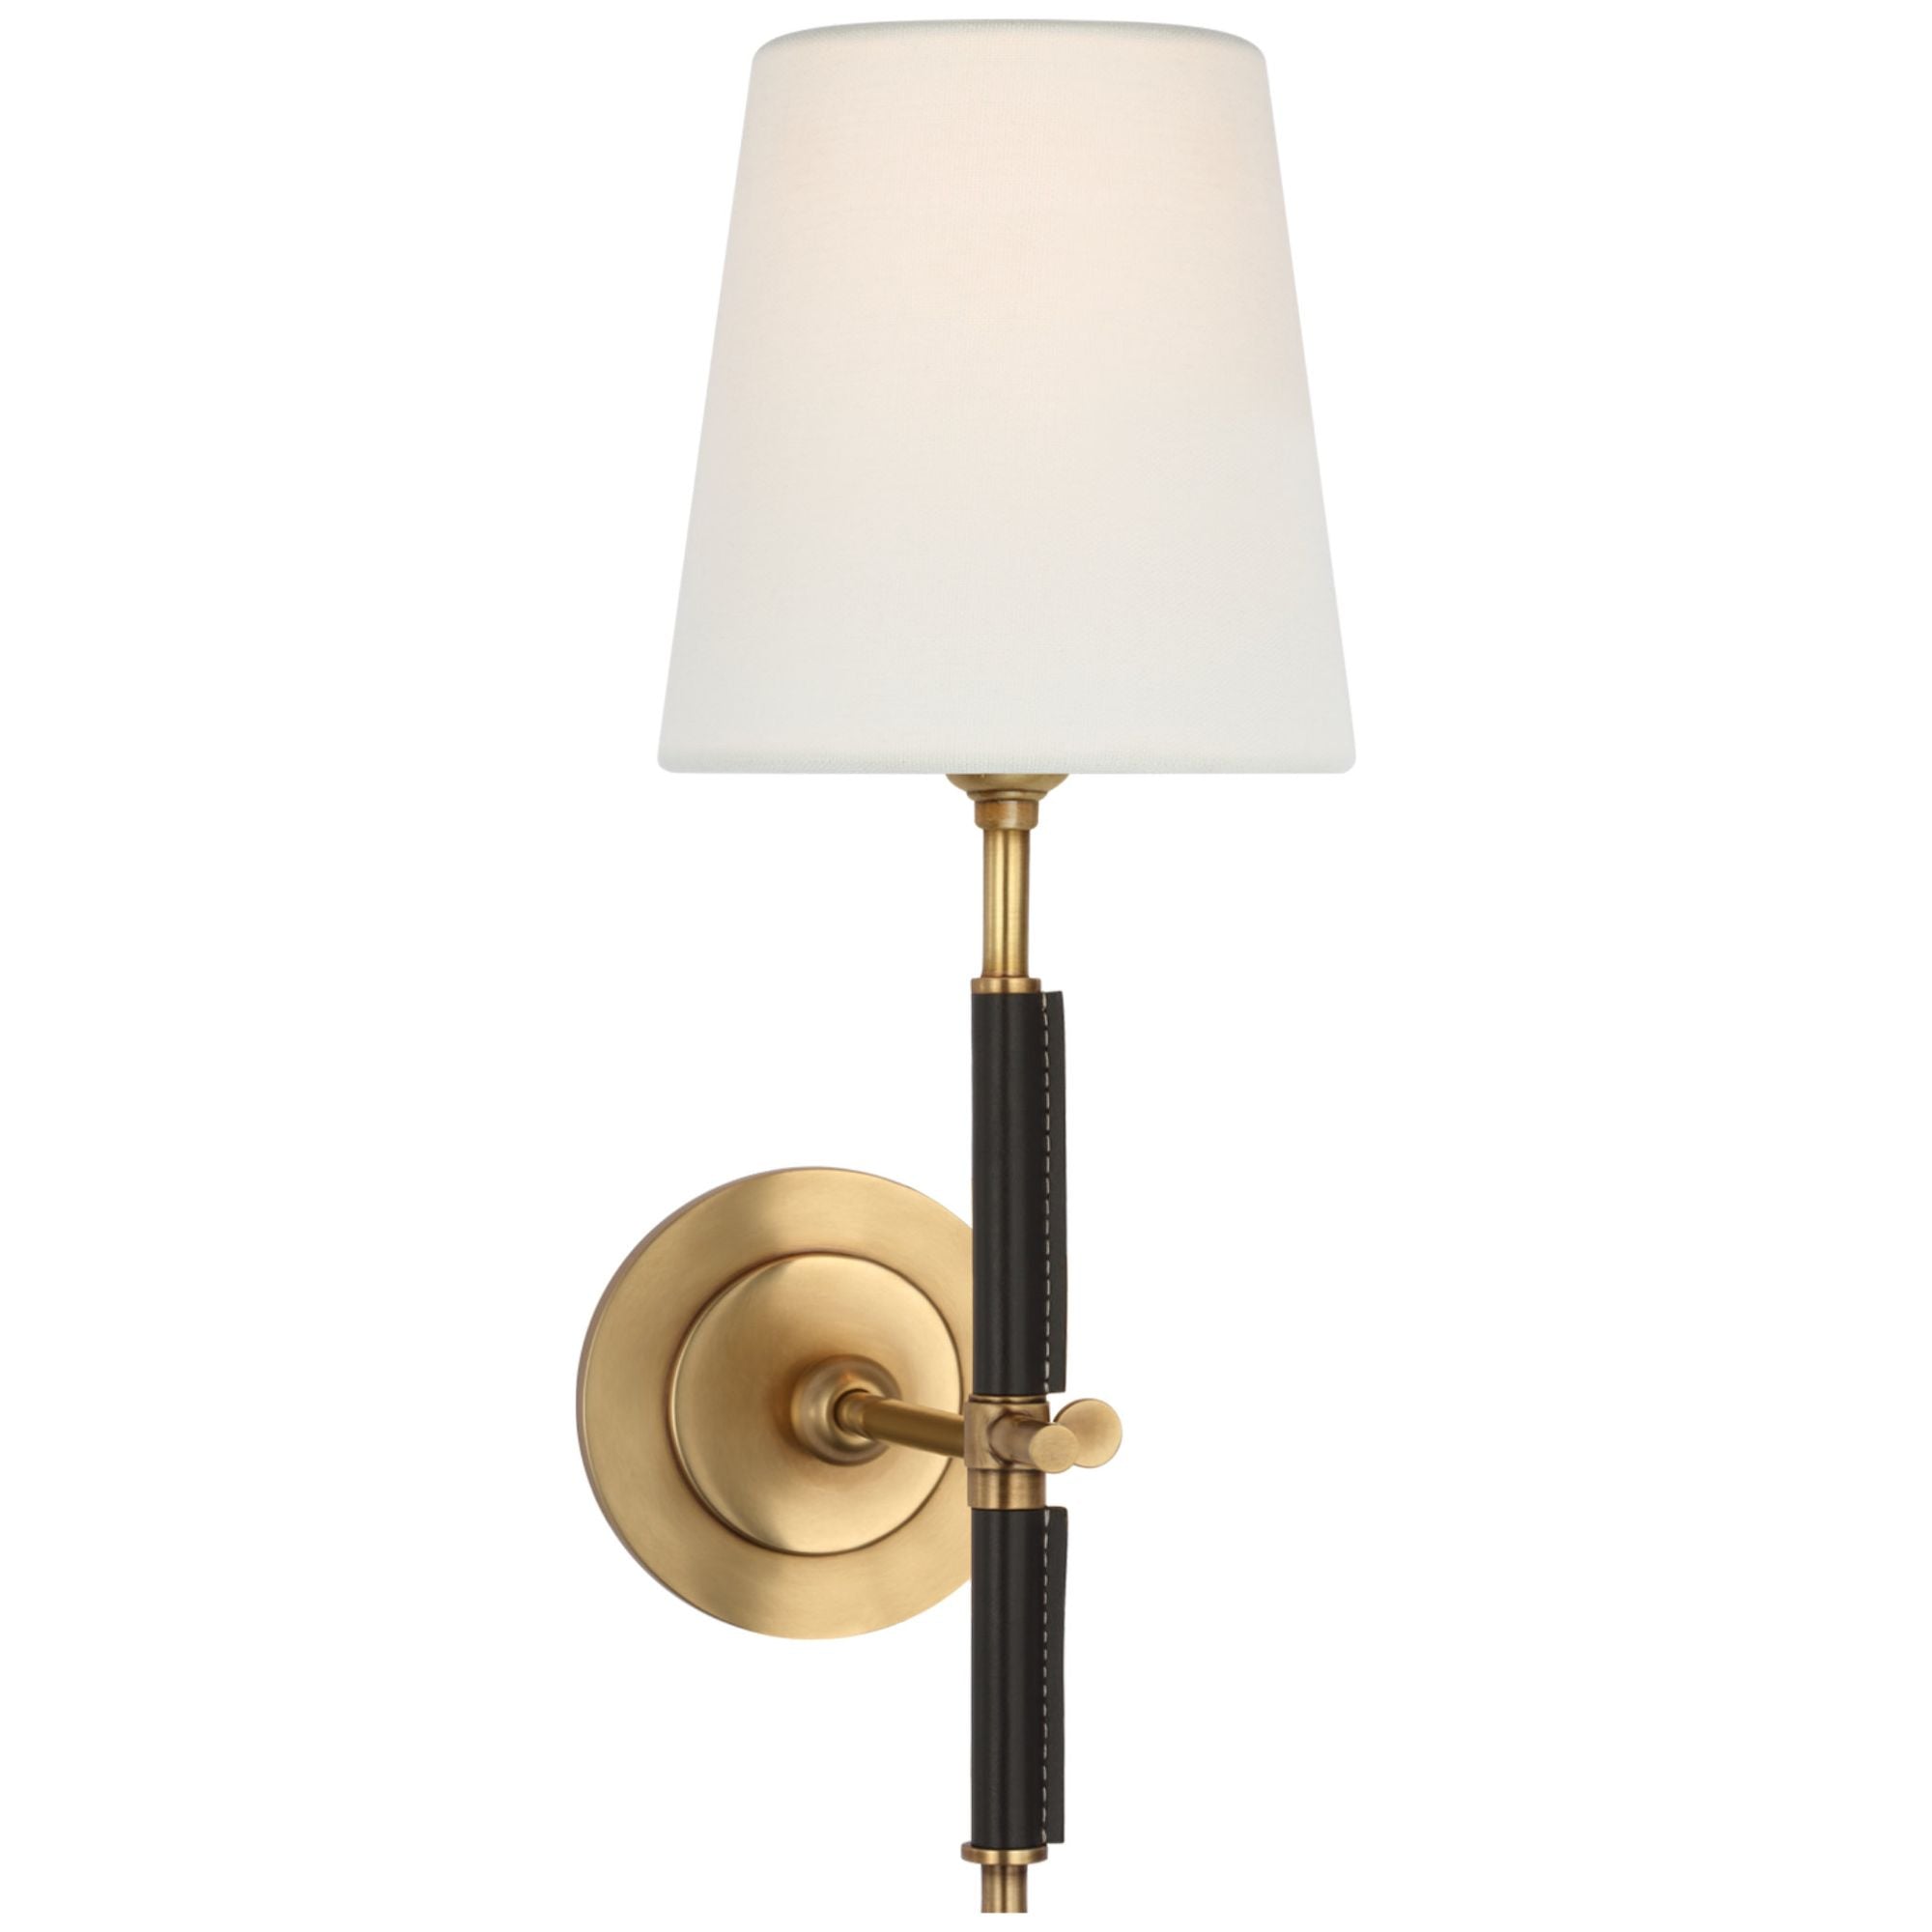 Visual Comfort Bryant 2 - Light Armed Sconce by Thomas O'Brien